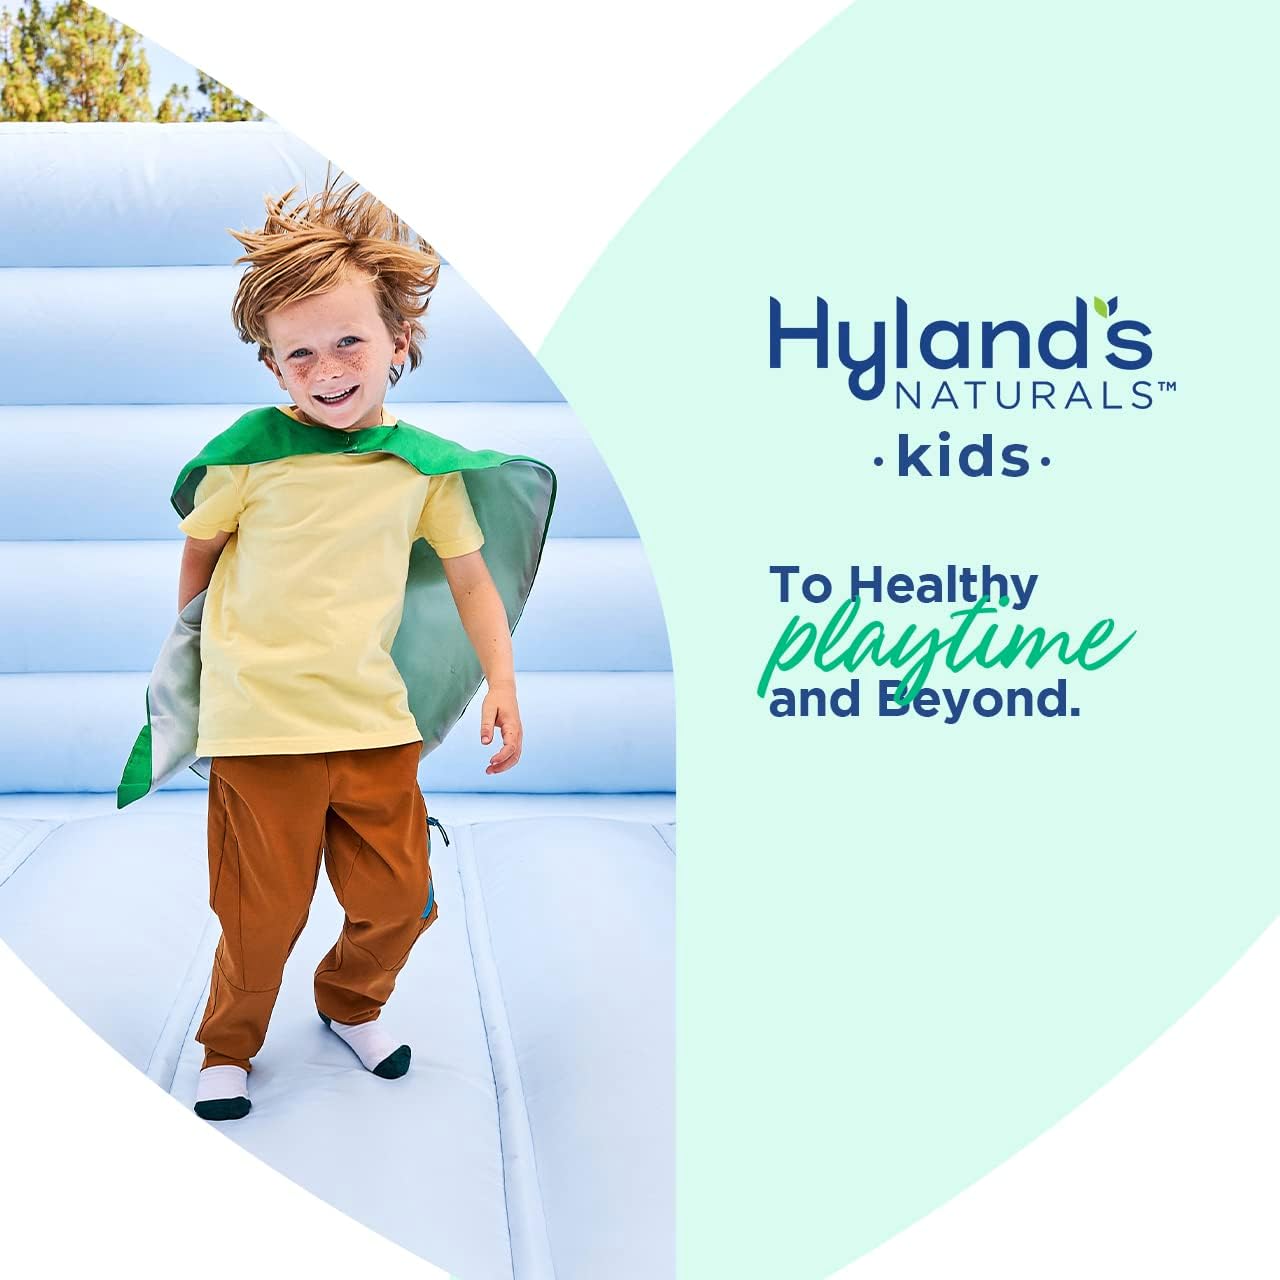 Hyland's Naturals Kids Cold & Cough, Daytime Cough Syrup Medicine for Kids Ages 2+, Decongestant, Sore Throat & Allergy Relief, Natural Treatment for Common Cold Symptoms, 4 Fl Oz : Cold And Flu Homeopathic Remedies : Health & Household